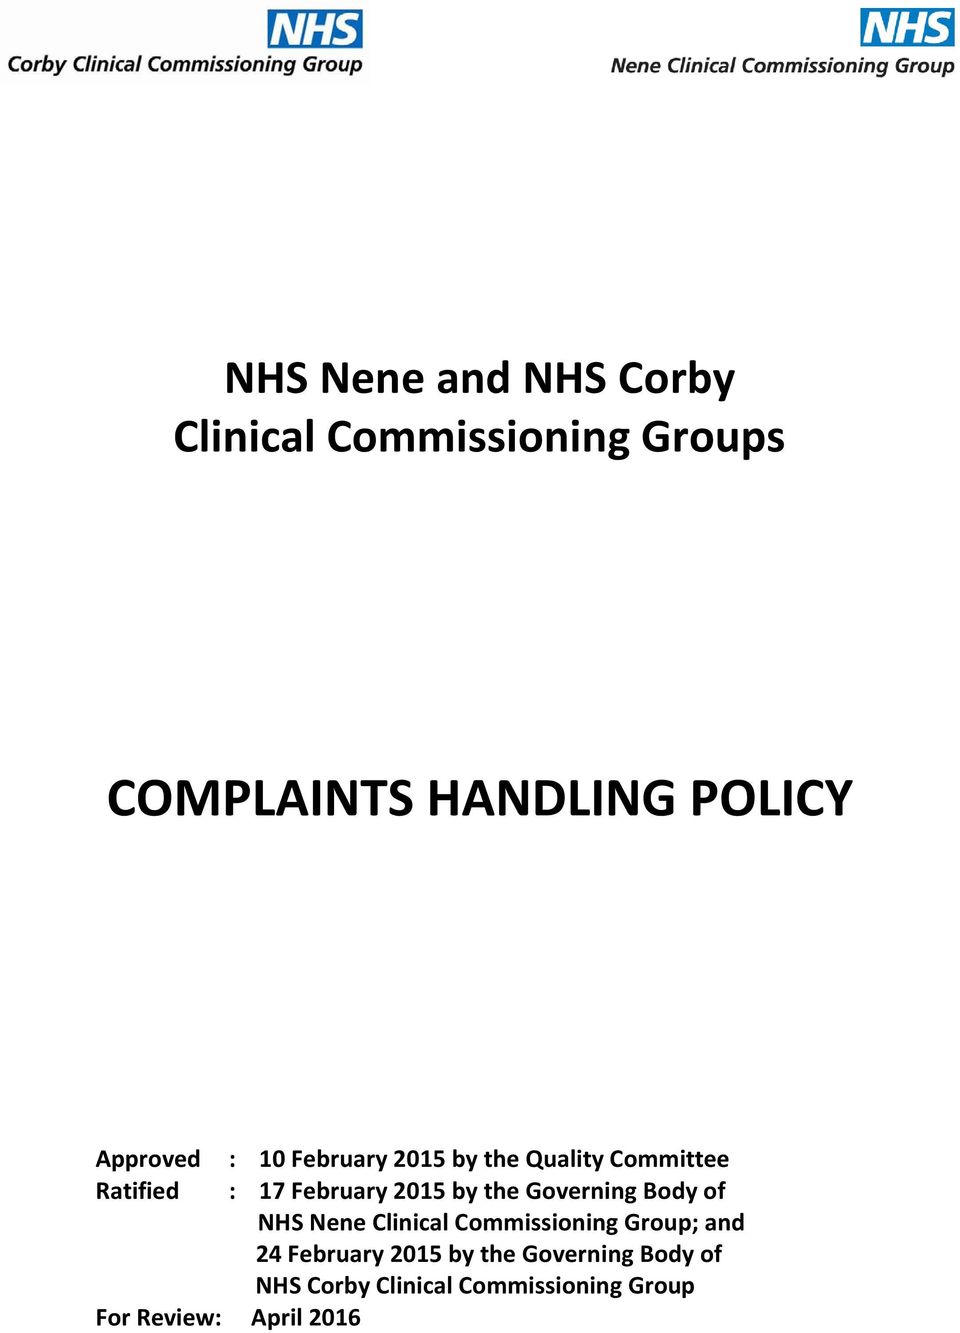 by the Governing Body of NHS Nene Clinical Commissioning Group; and 24 February